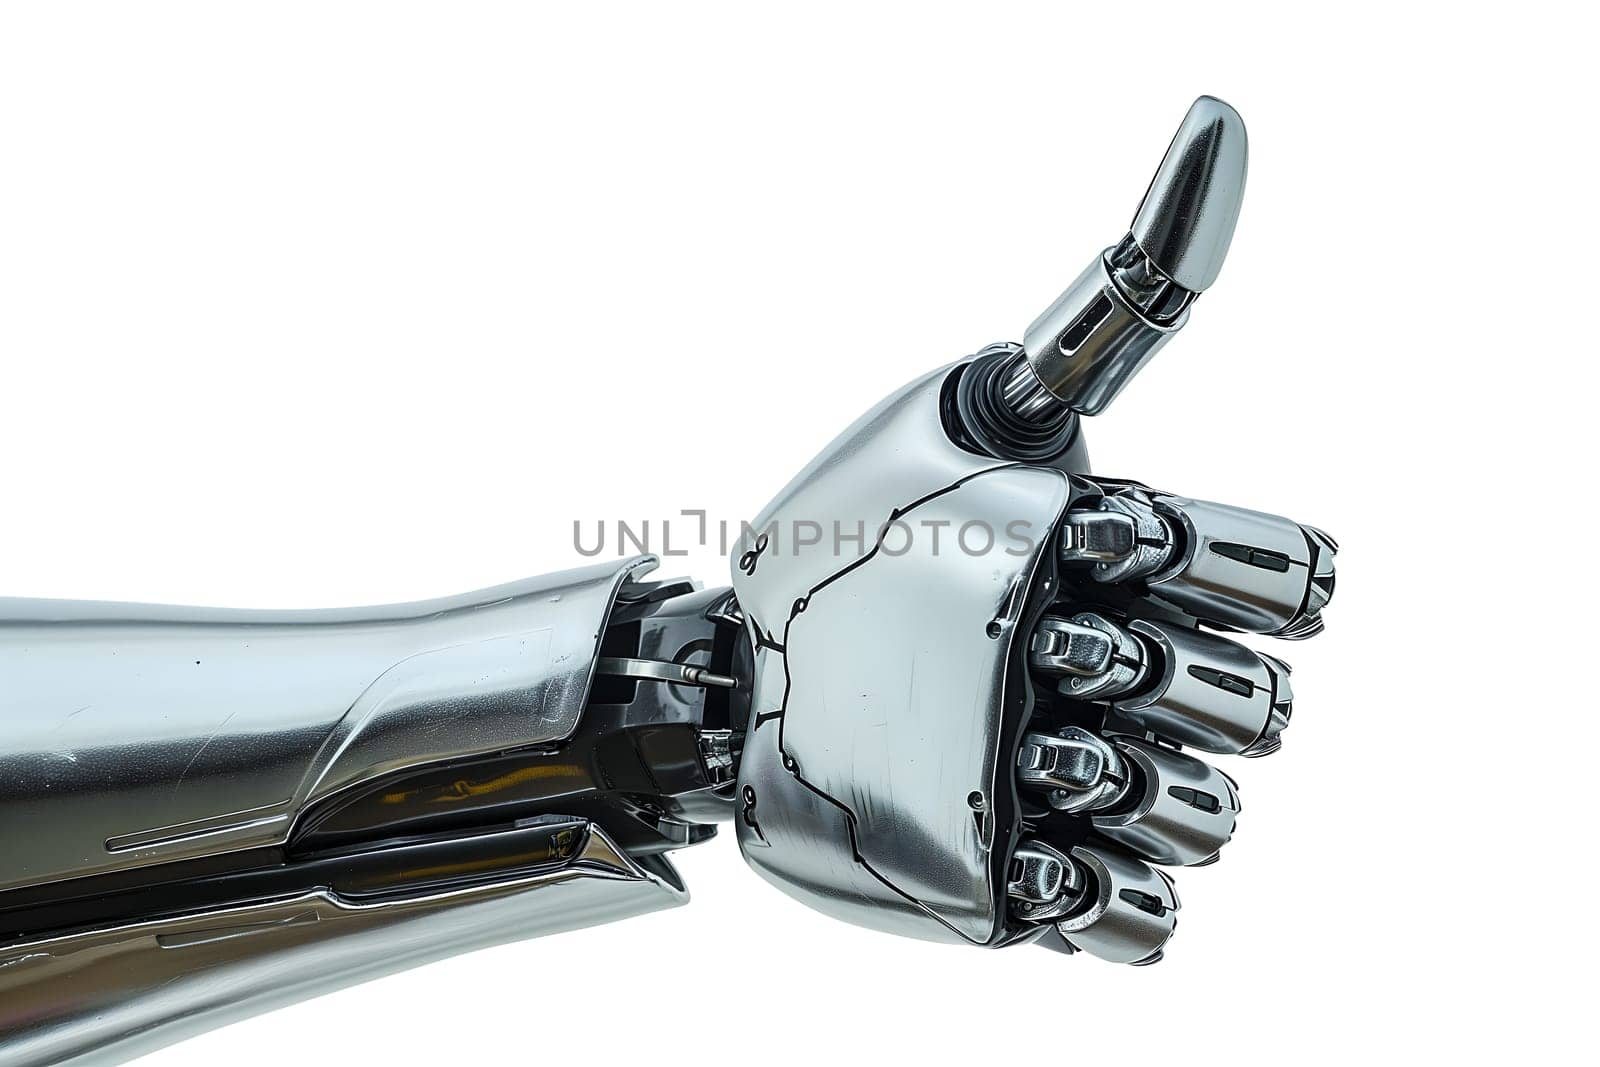 Robot hand with thumb up gesture closeup on white background by z1b